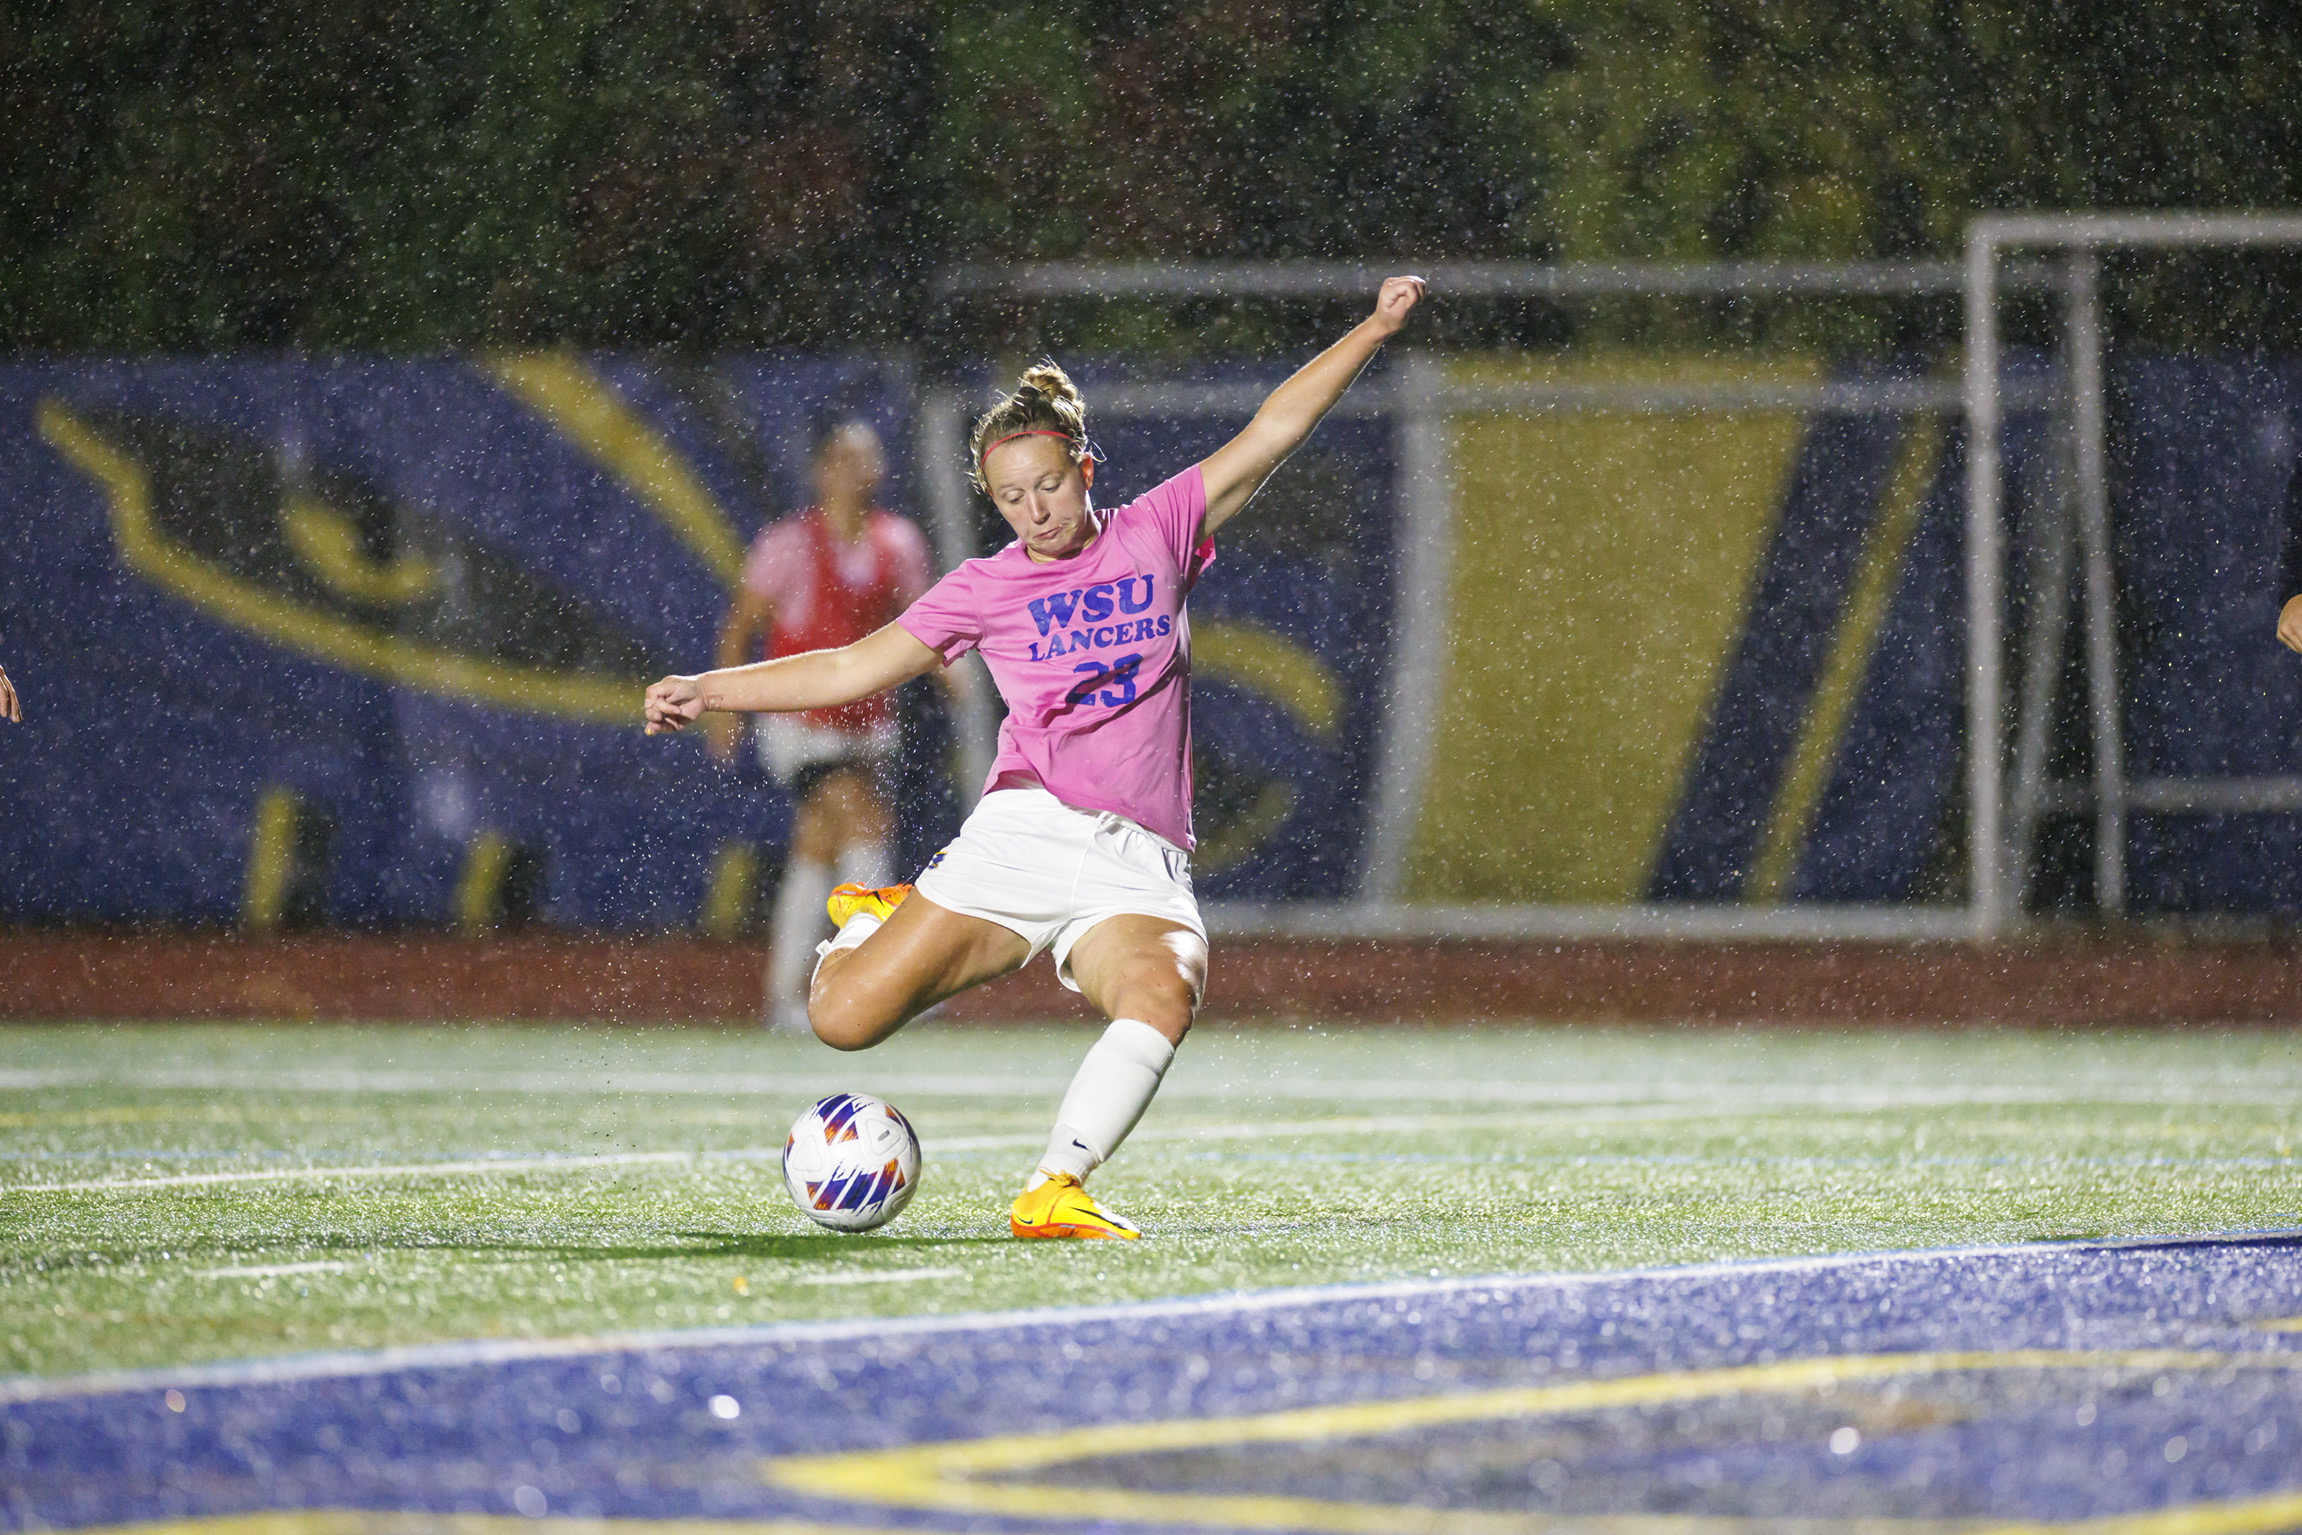 Lancers fall to Wolves on Breast Cancer Awareness Night